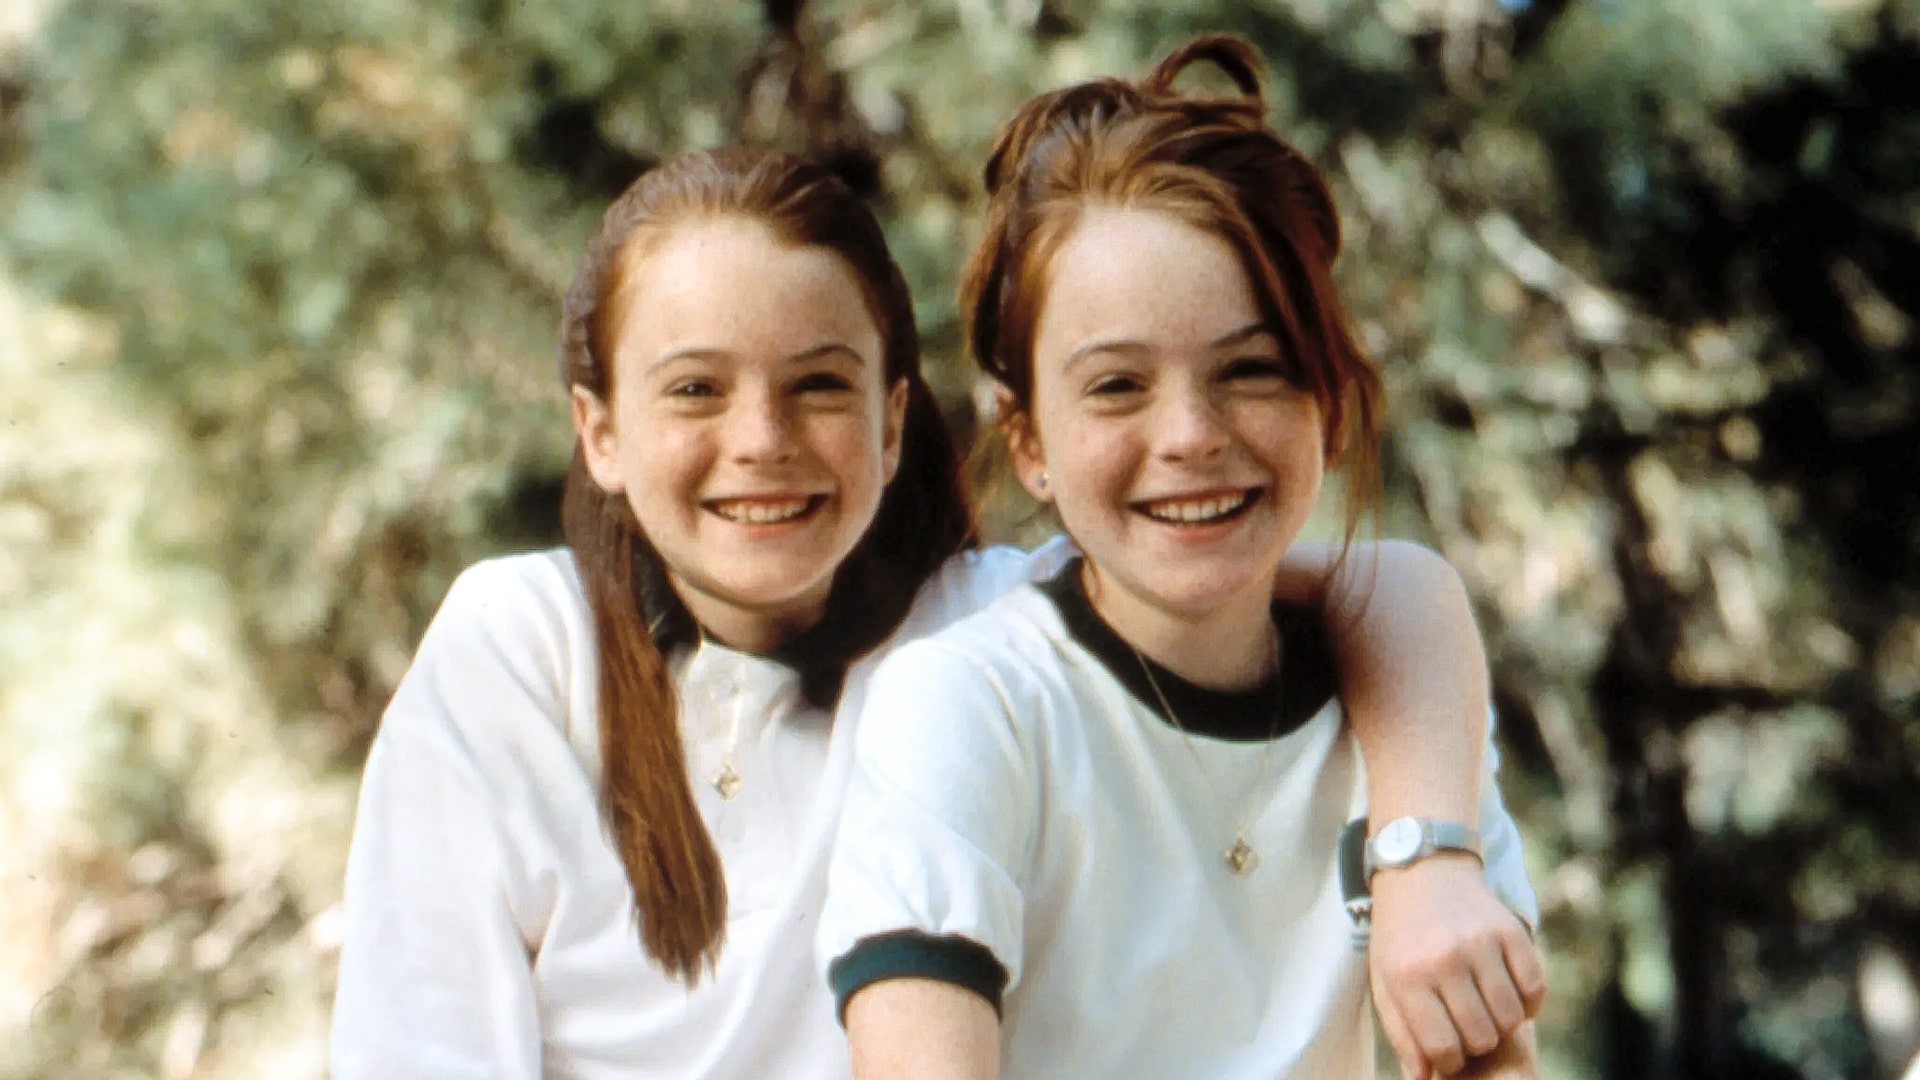 The Parent Trap Movie - 20 The Parent Trap (1998) Movie Facts You Haven't Read Before